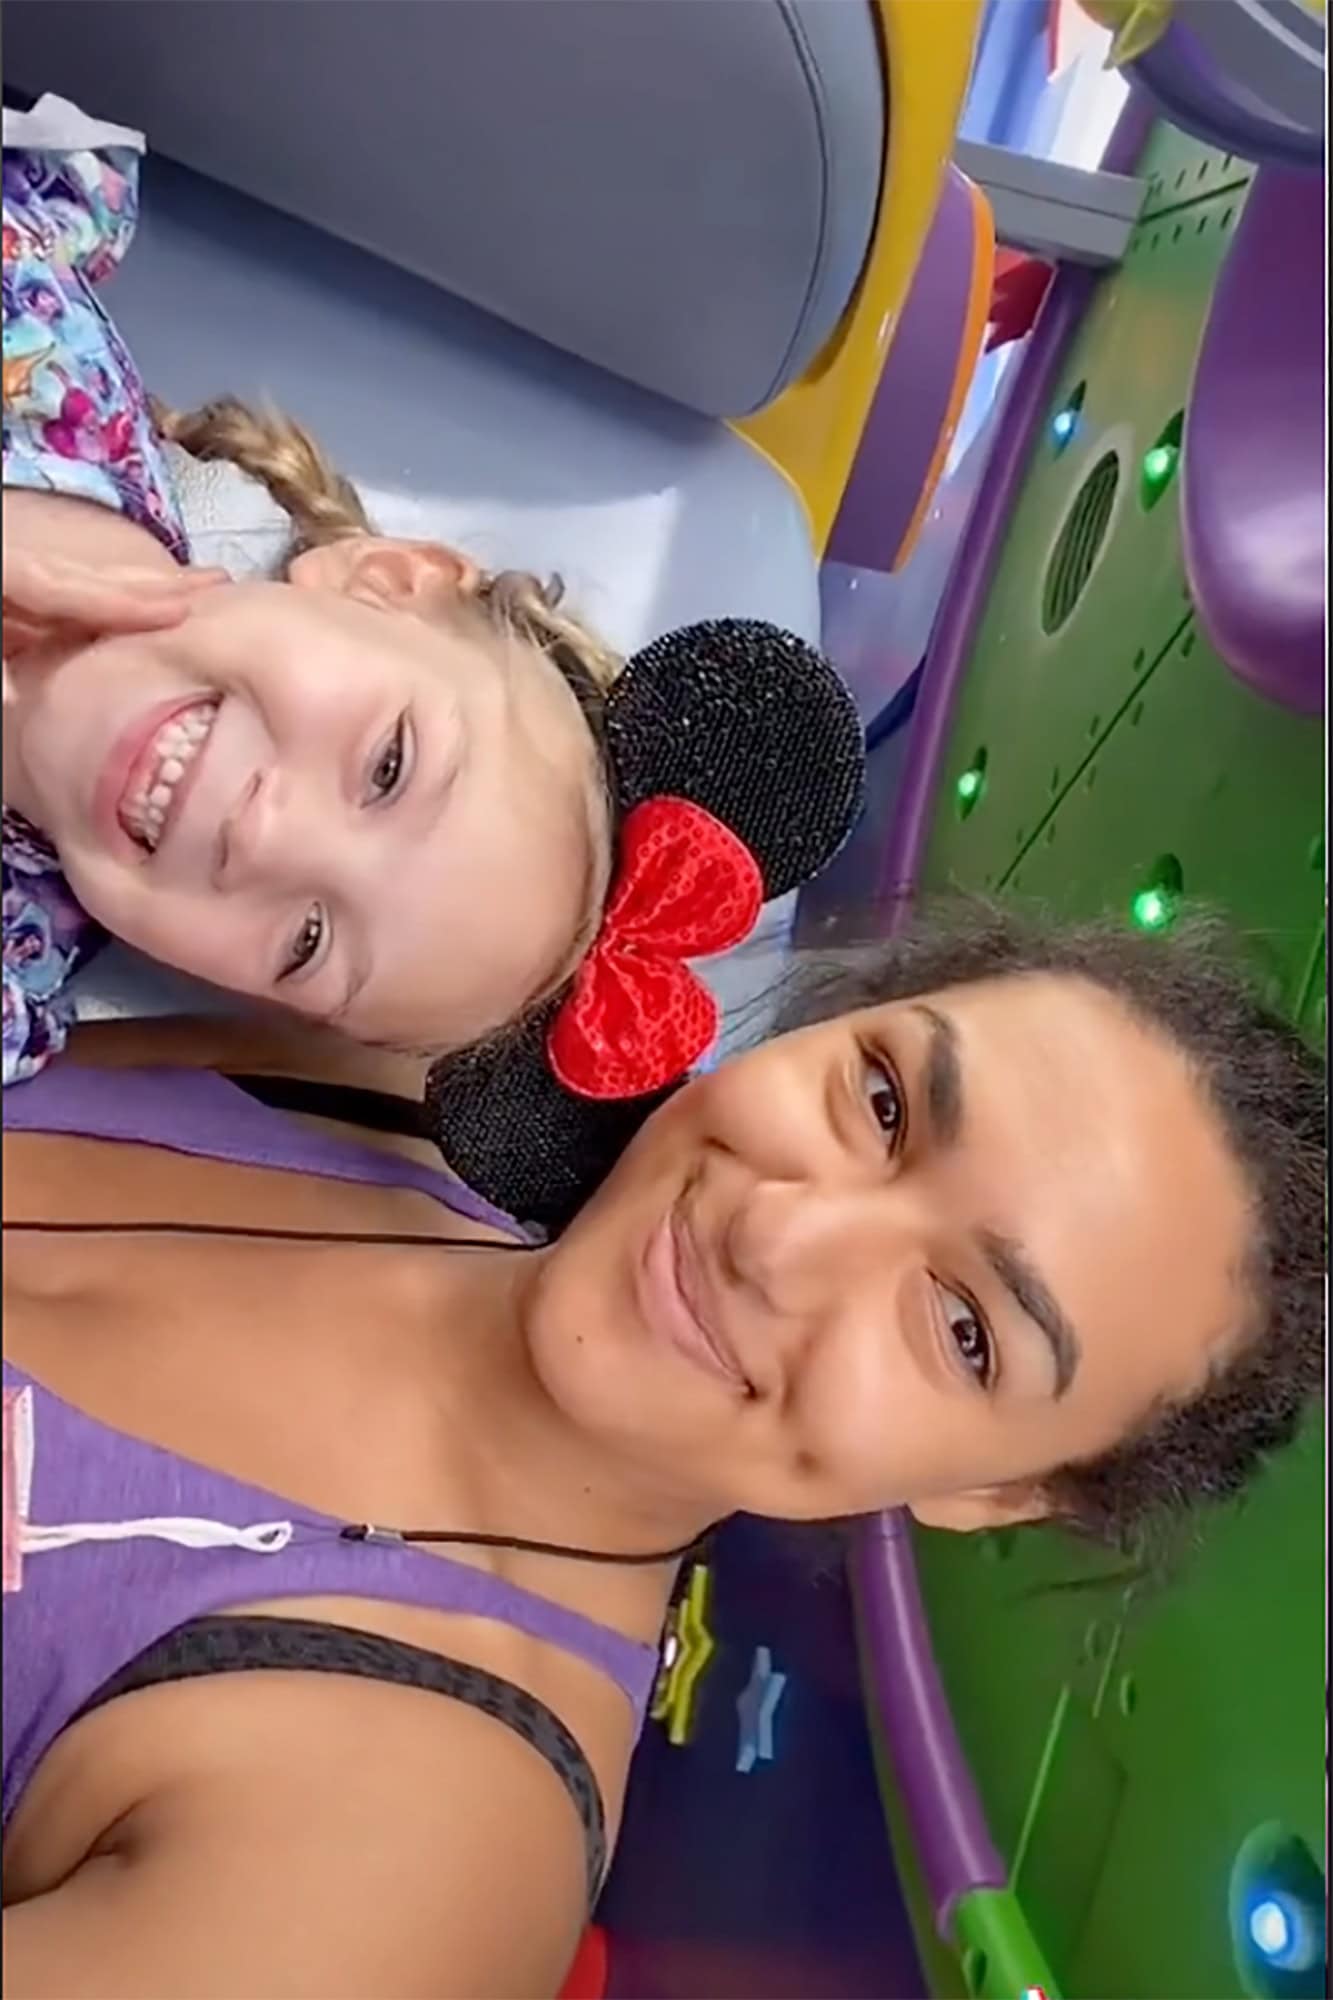 Hoda and Jenna Discuss the Rising Trend of Theme Park Nannies